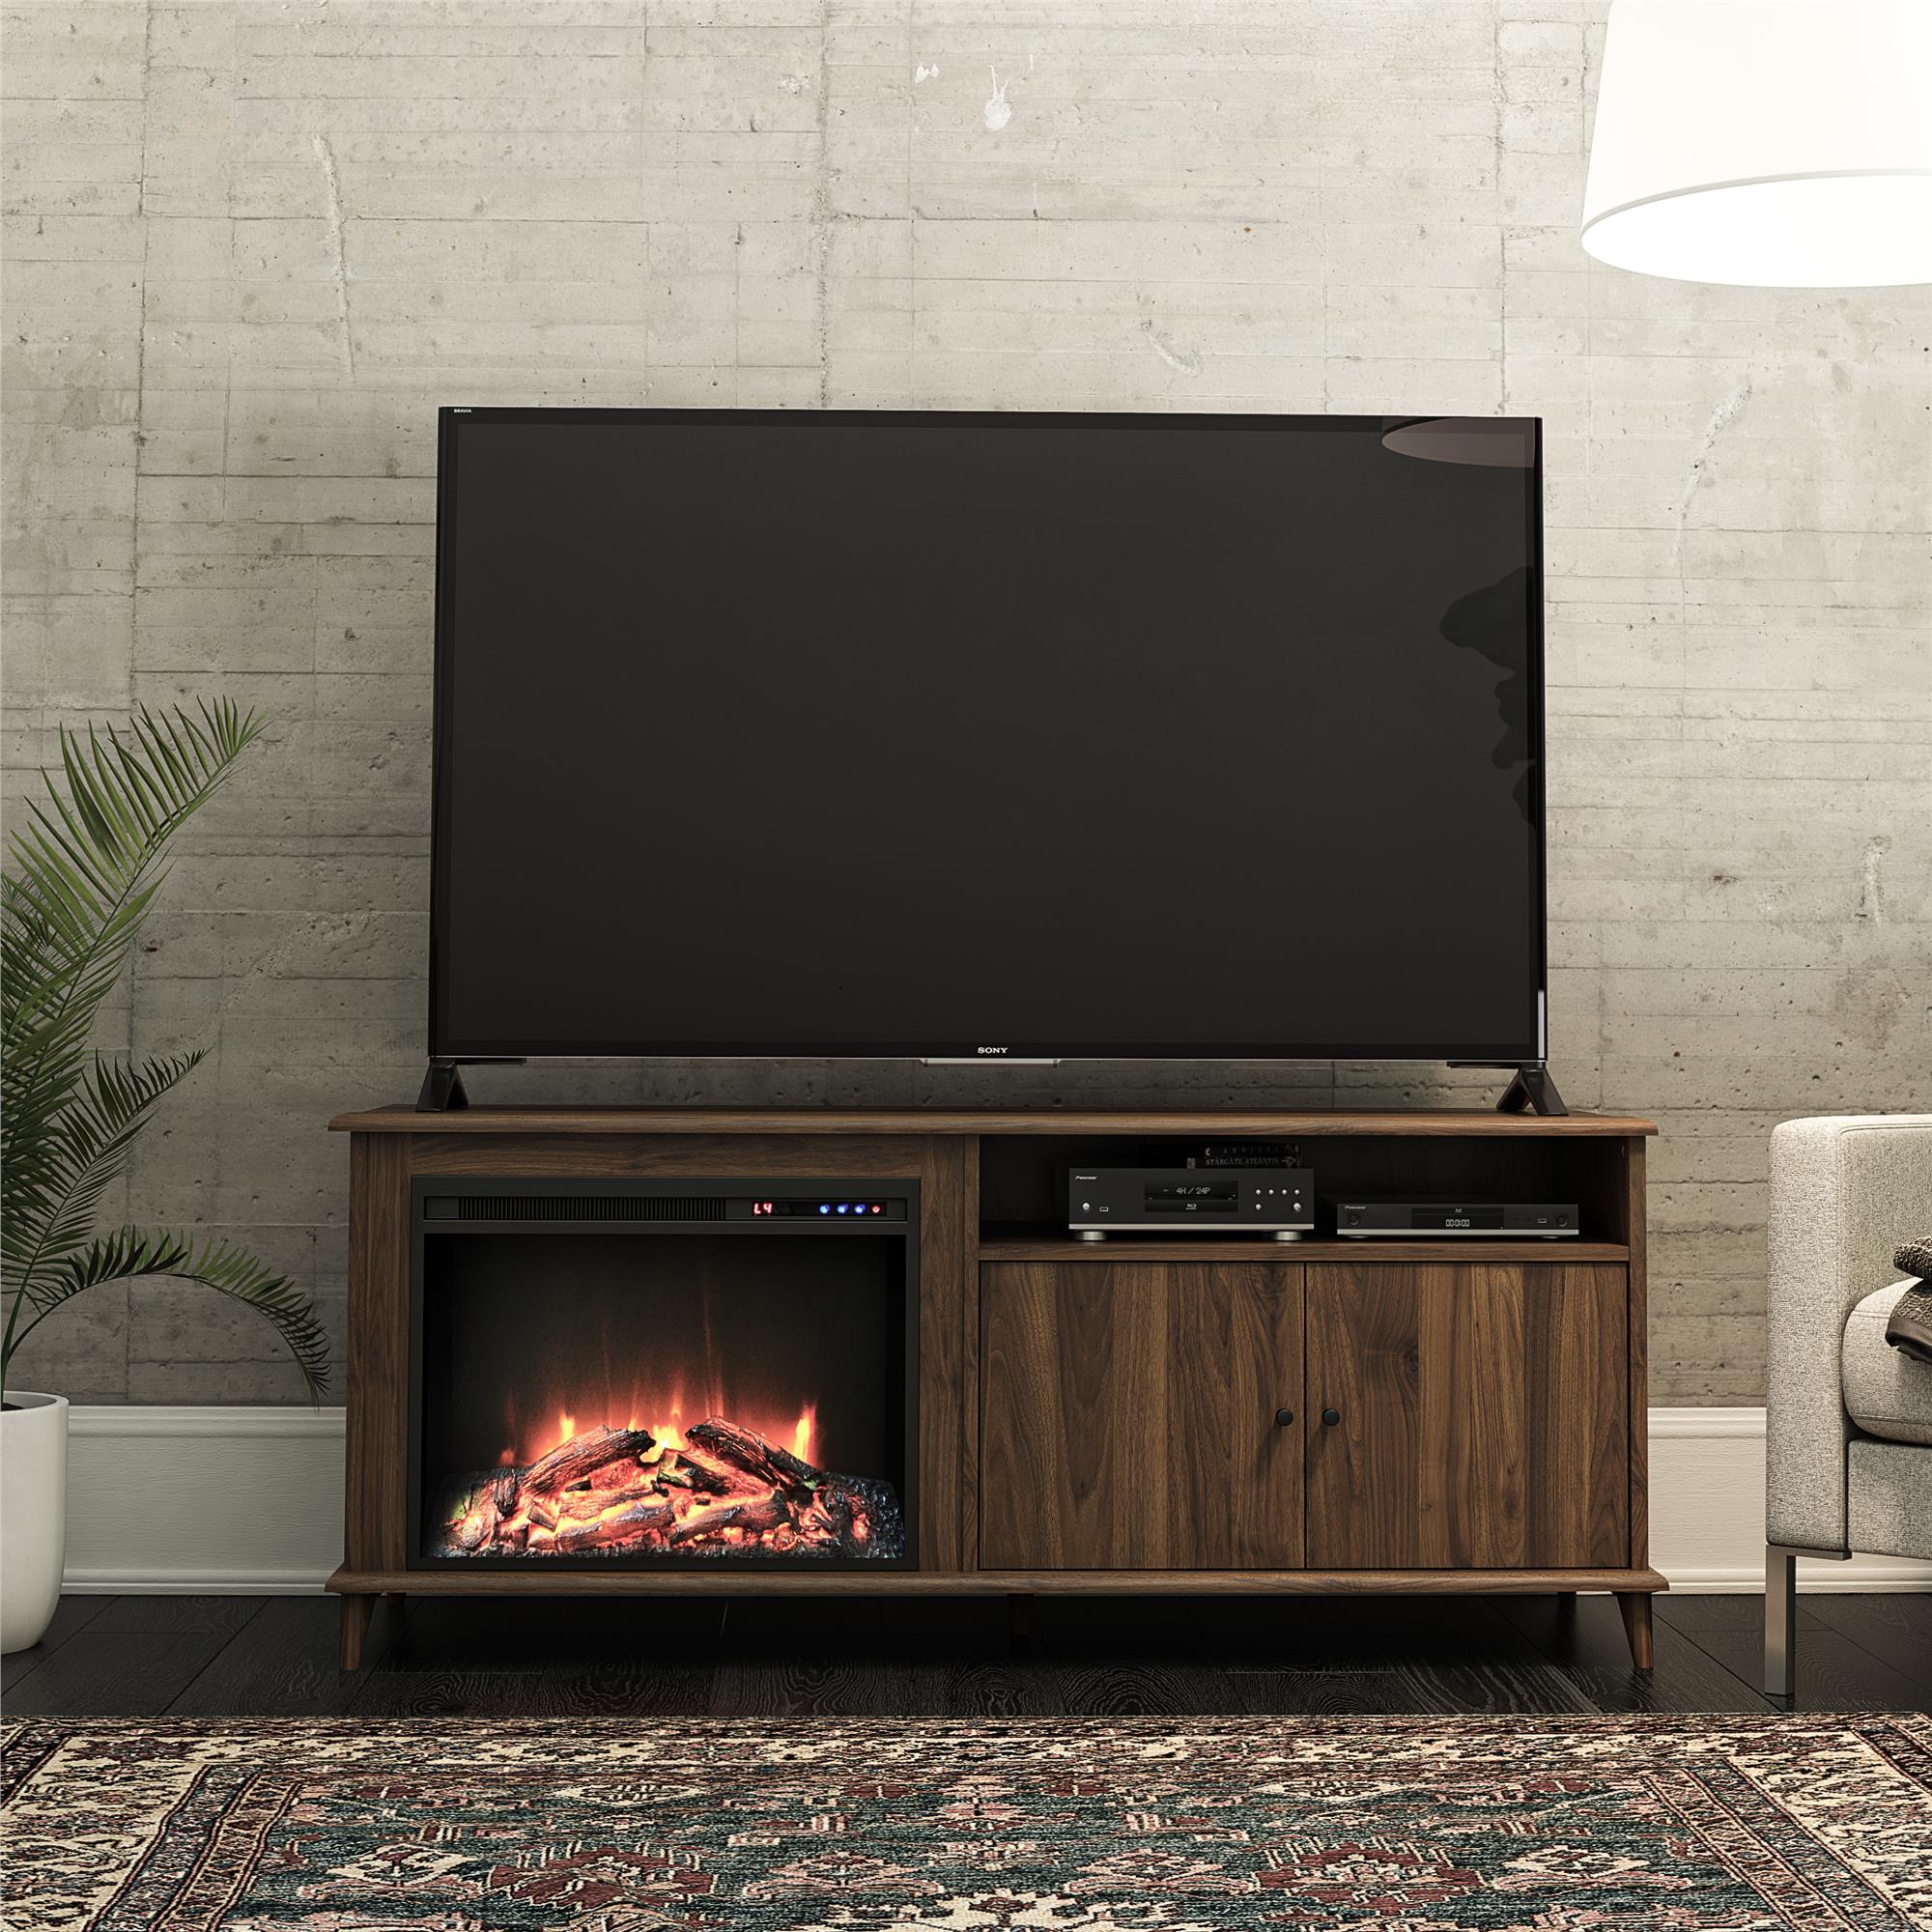 Ameriwood Home Farnsworth Fireplace TV Stand for TVs up to 65", Walnut - image 1 of 11